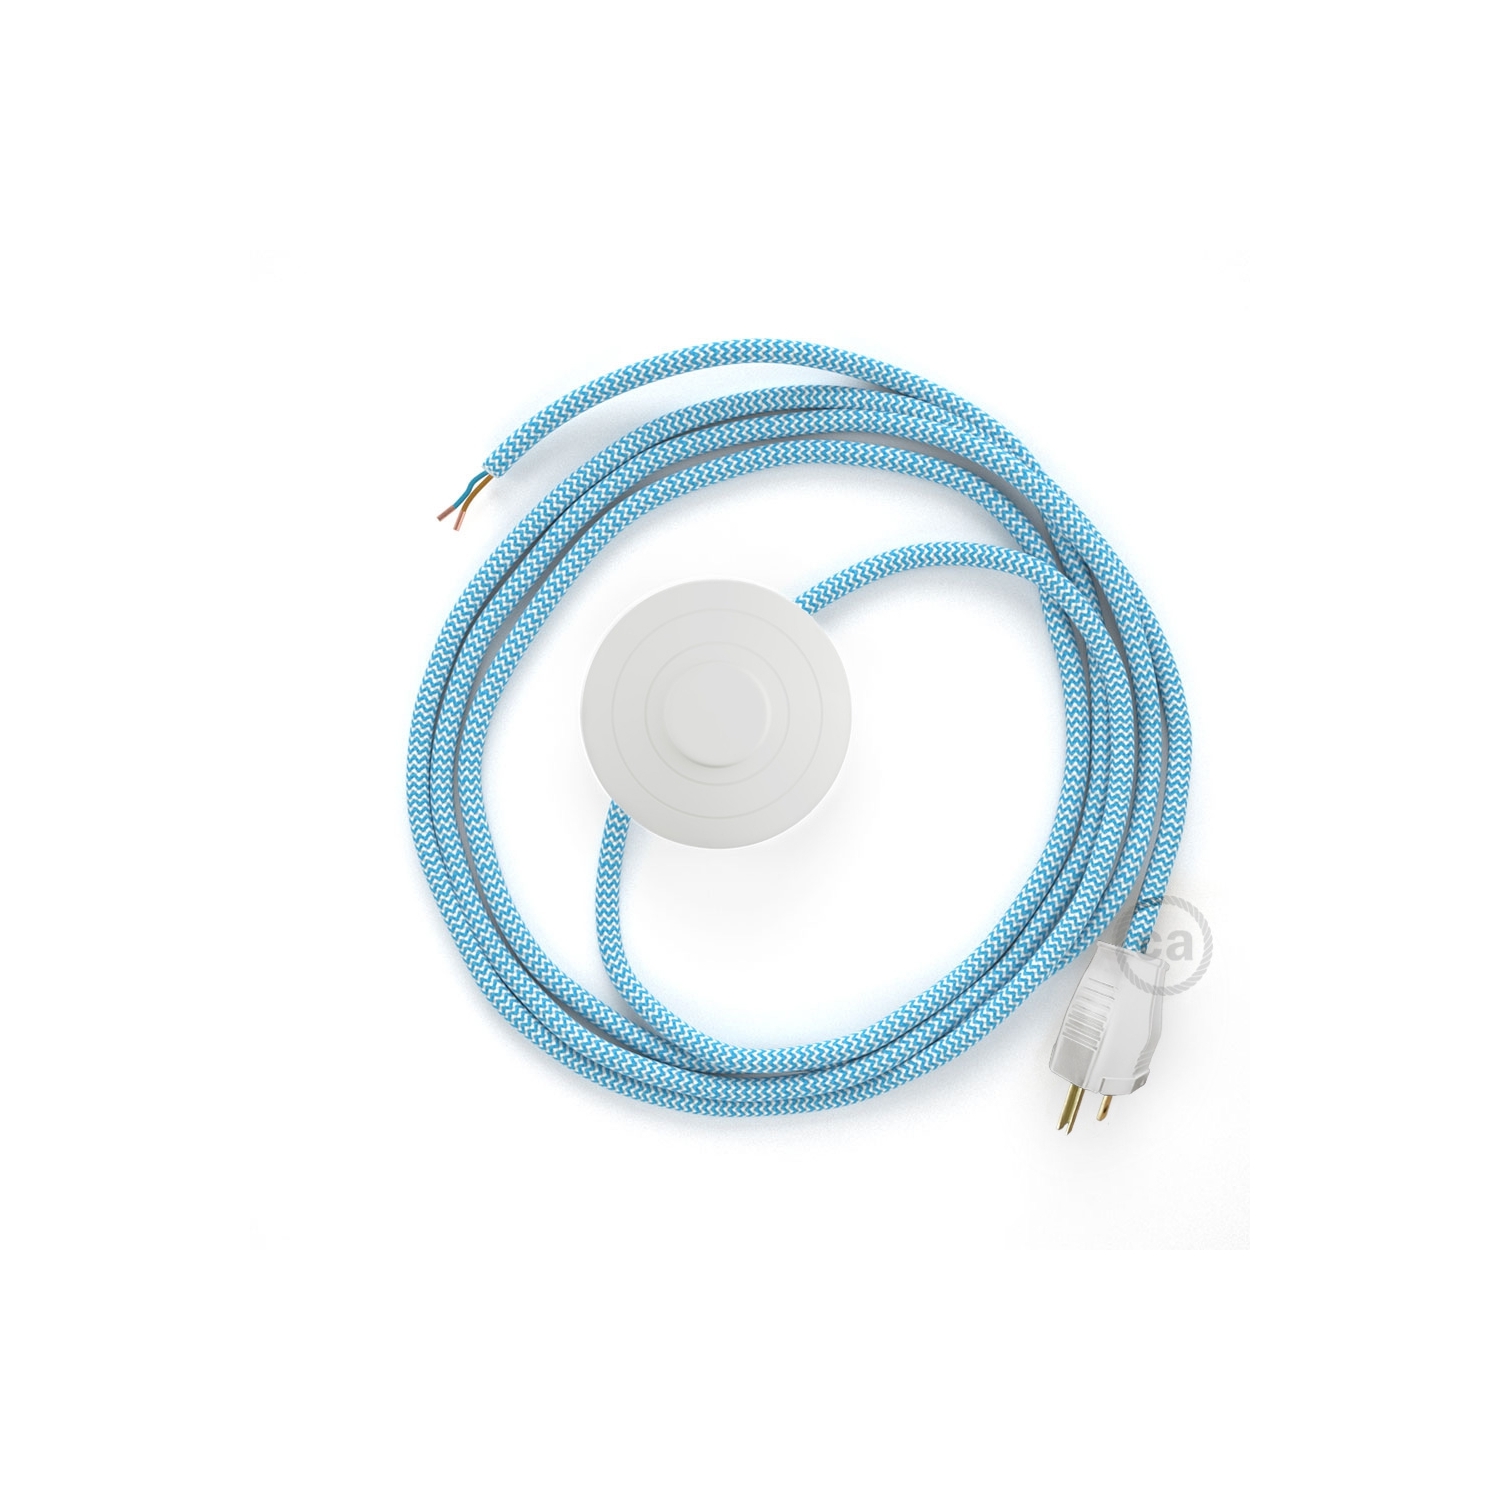 Power Cord with foot switch, RZ11 Light Blue & White Chevron - Choose color of switch/plug